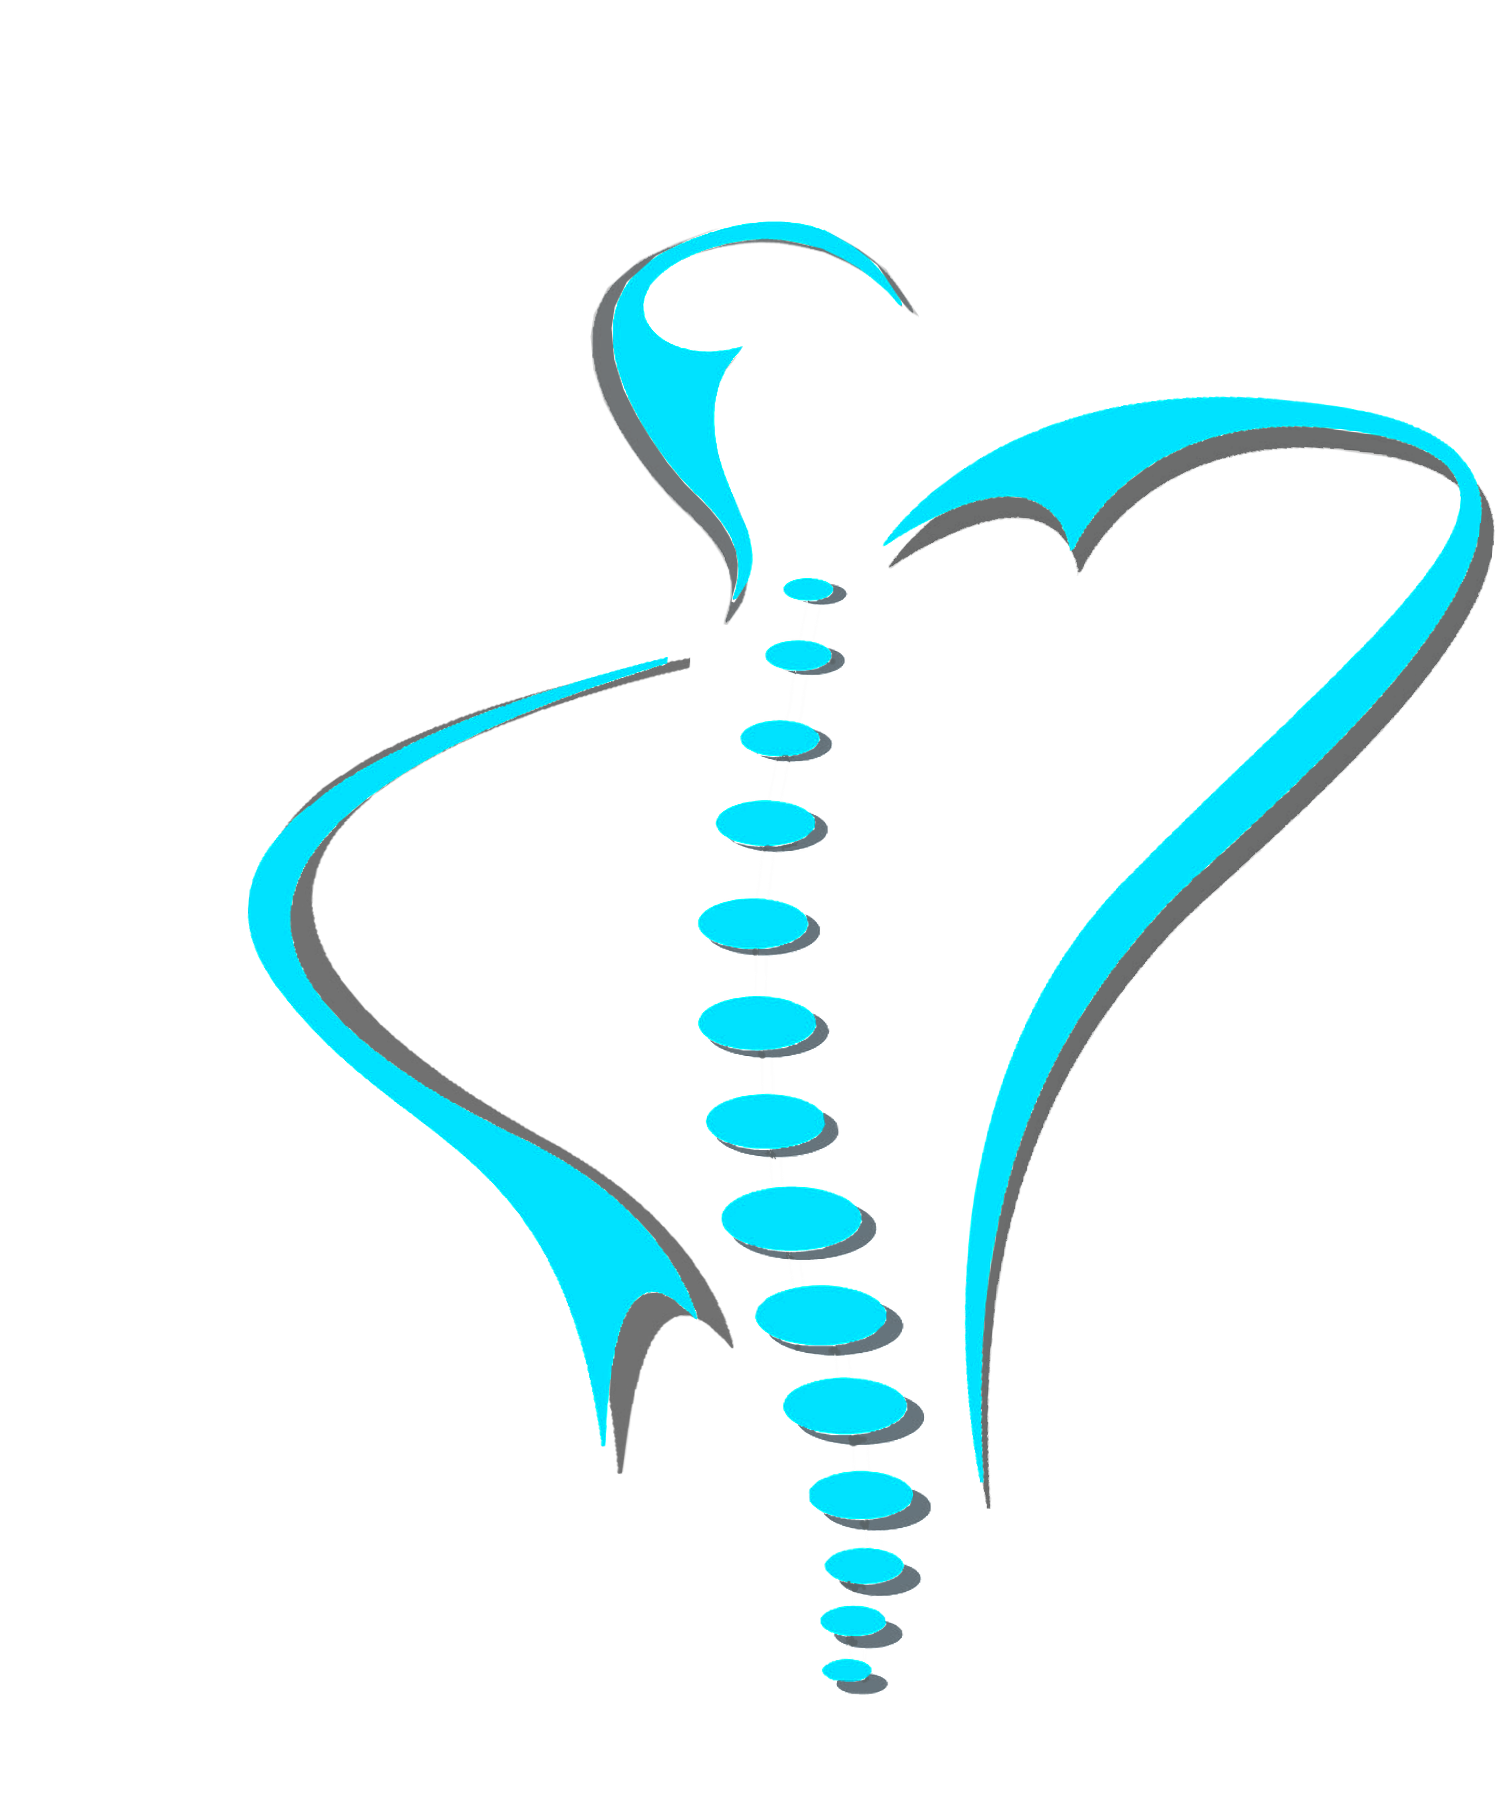 massages clipart chiropractic spine